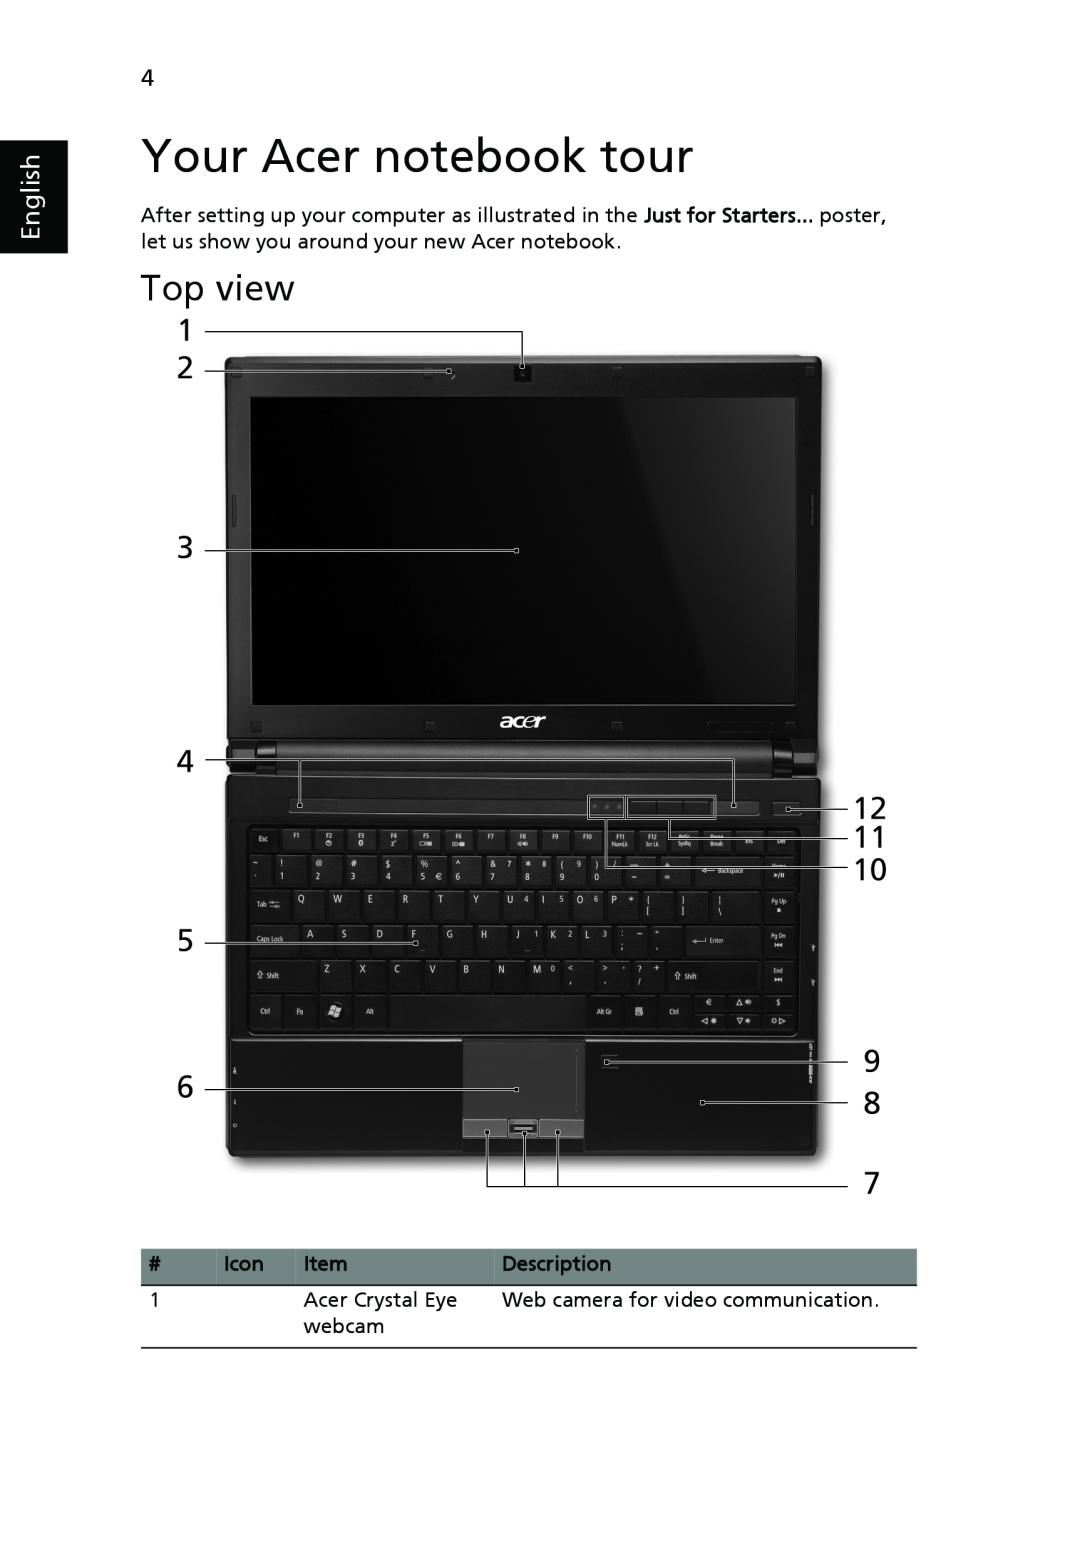 Acer 8331 Series, 8371 Series manual Your Acer notebook tour, Top view, English 